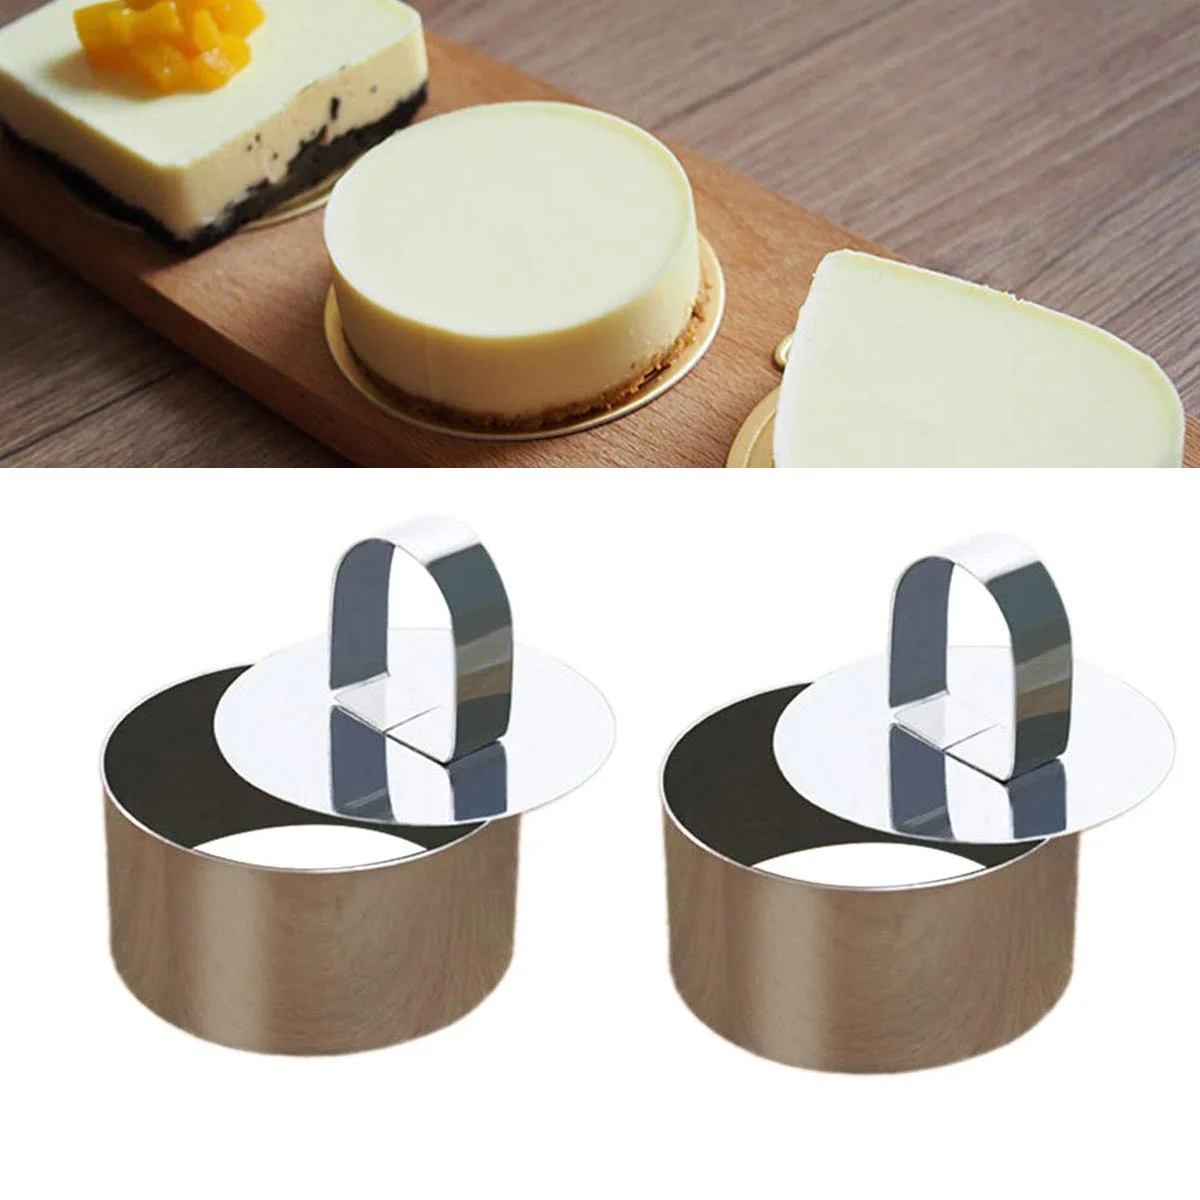 

2 Pcs Stainless Steel Dessert Mousse Mold Food Tower Presentation Cooking Ring Cake Cutters with Pusher (Round)